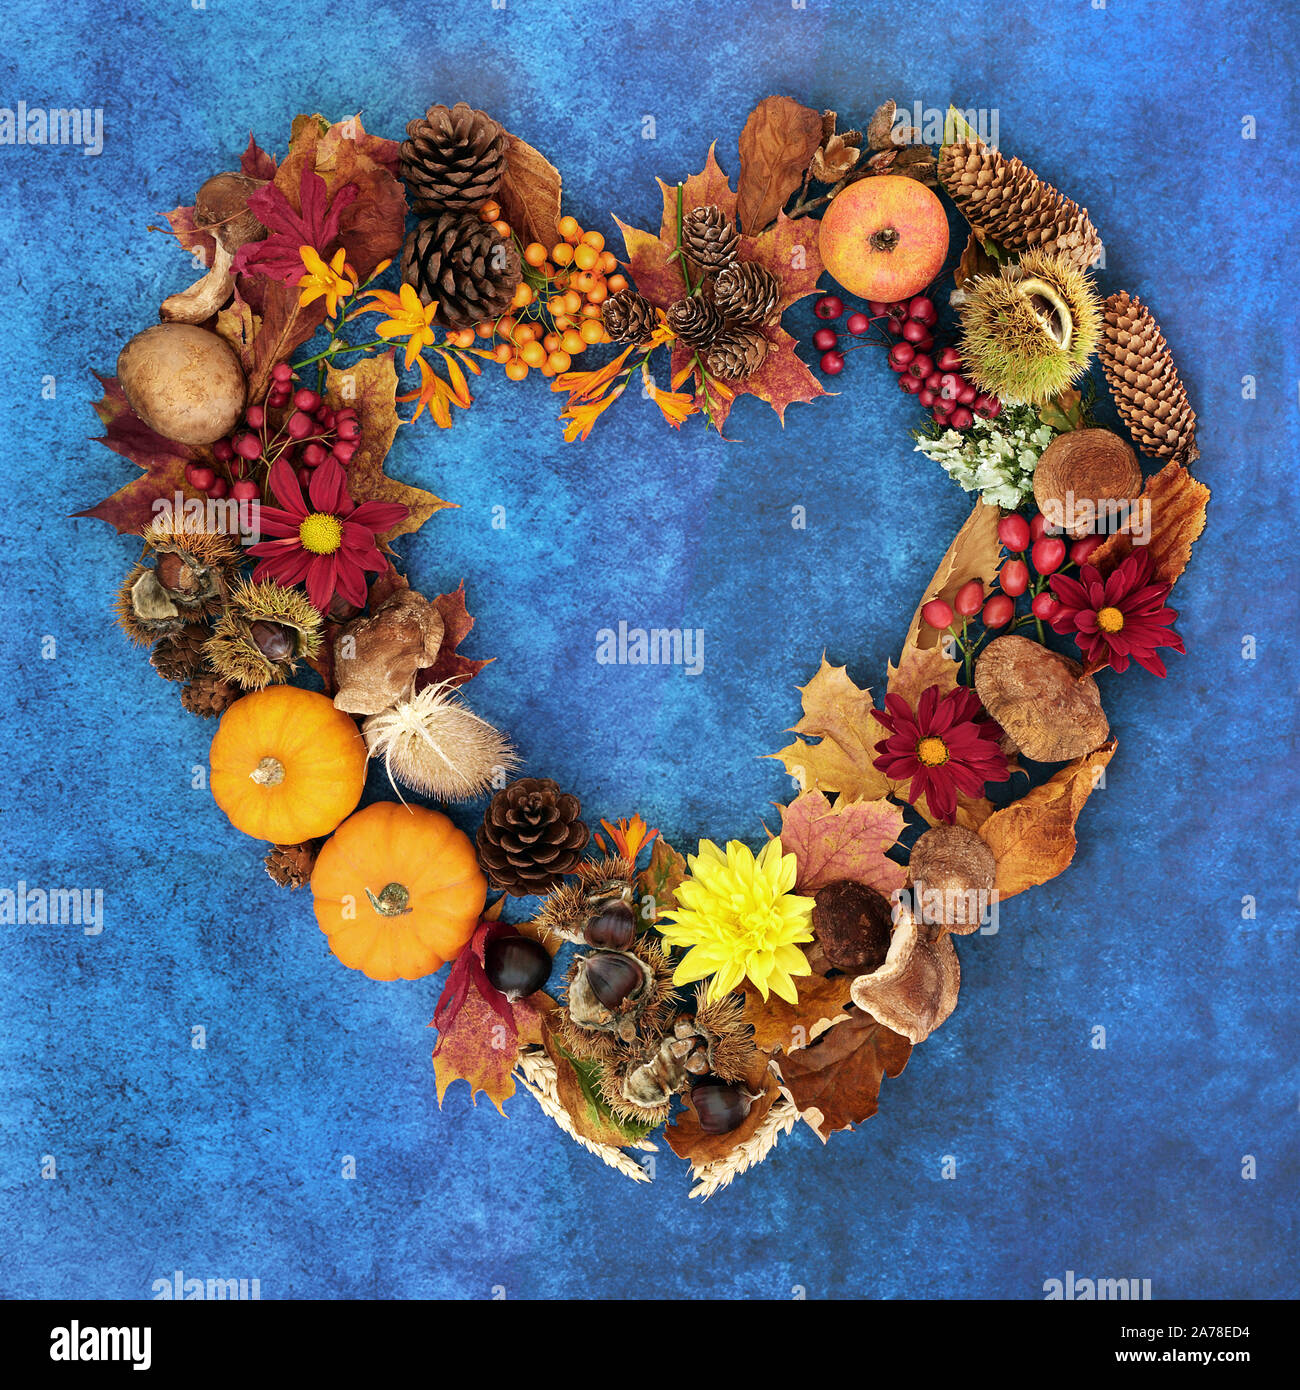 Heart shaped Autumn wreath with a variety of natural flora, fauna and food on mottled blue background. Harvest festival theme. Stock Photo